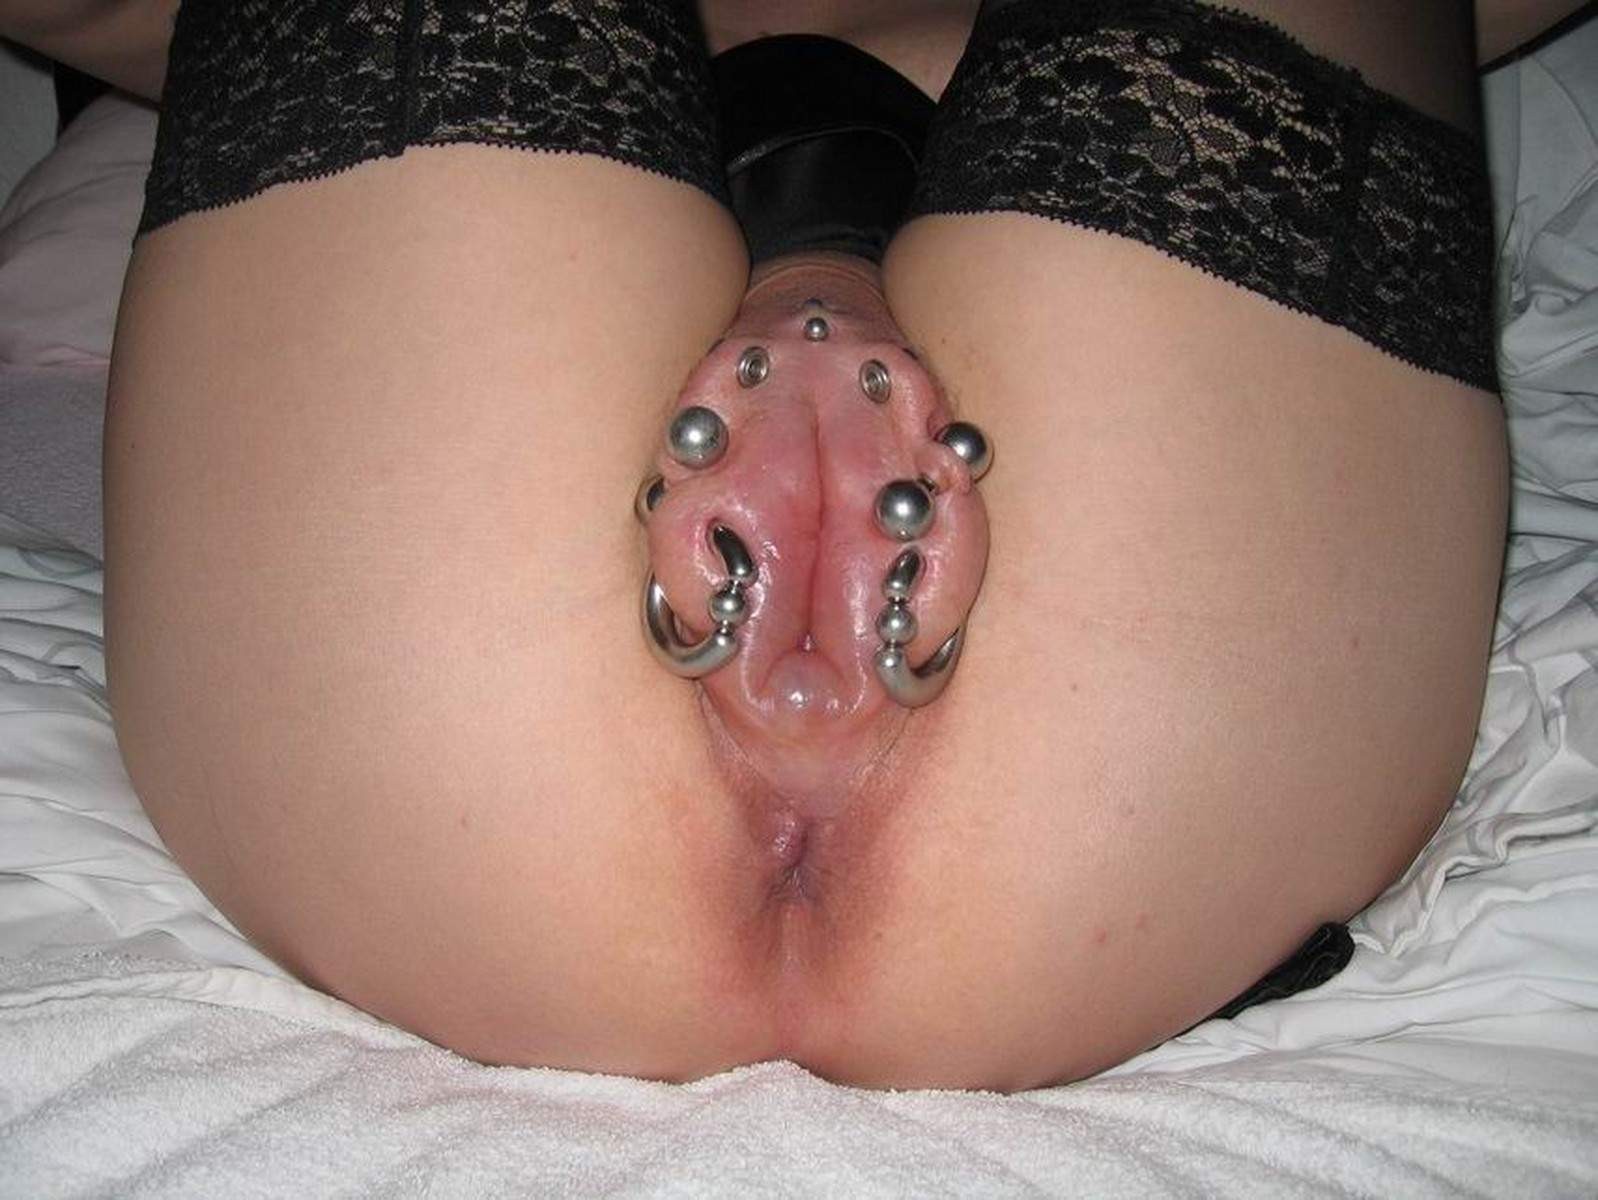 Shaved pierced cunt pics